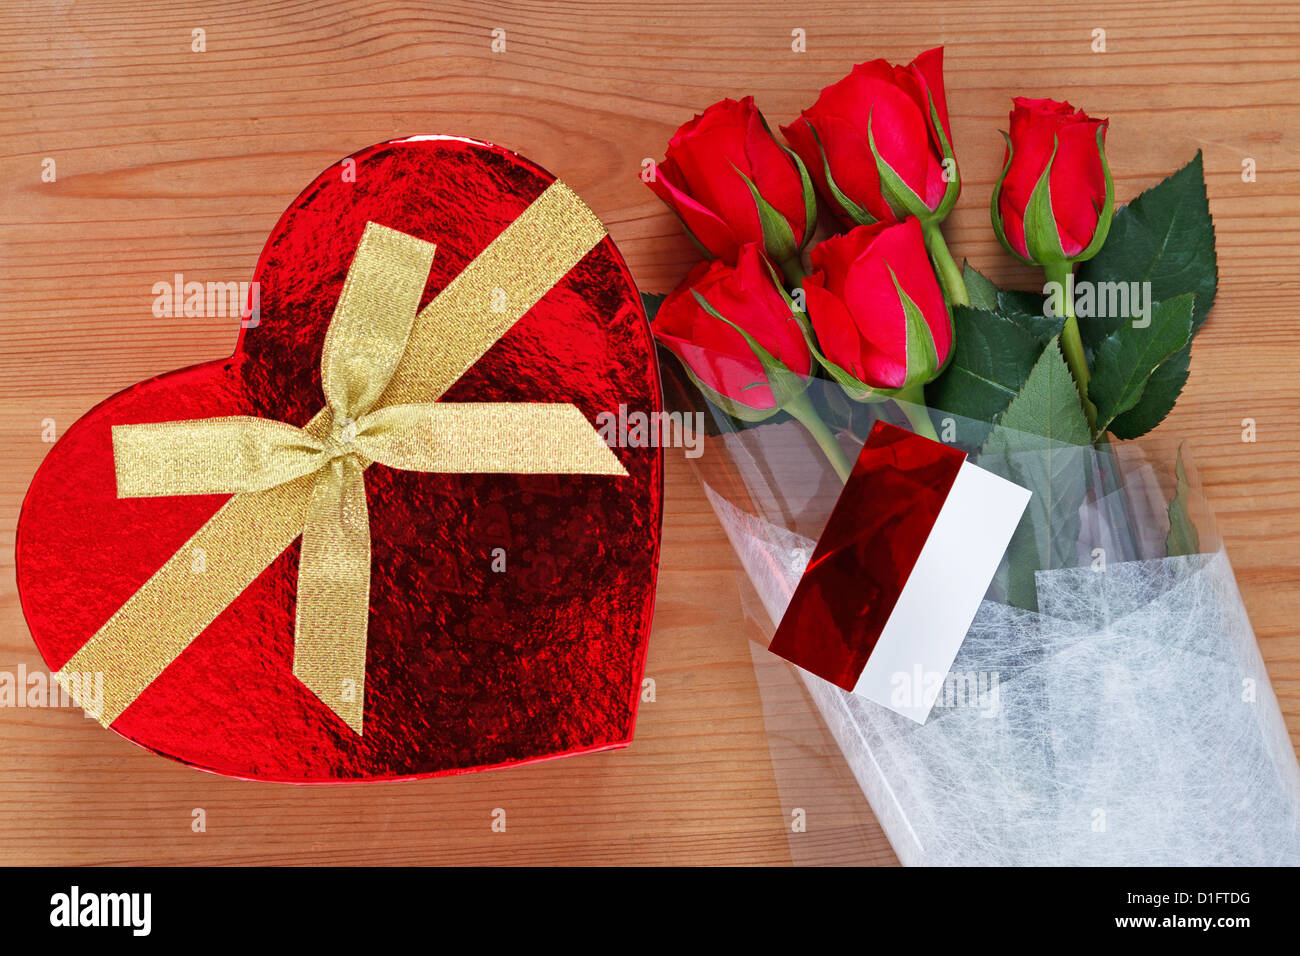 Chocolates in a heart shaped box and a bunch of red roses with card on an old wooden table. Stock Photo